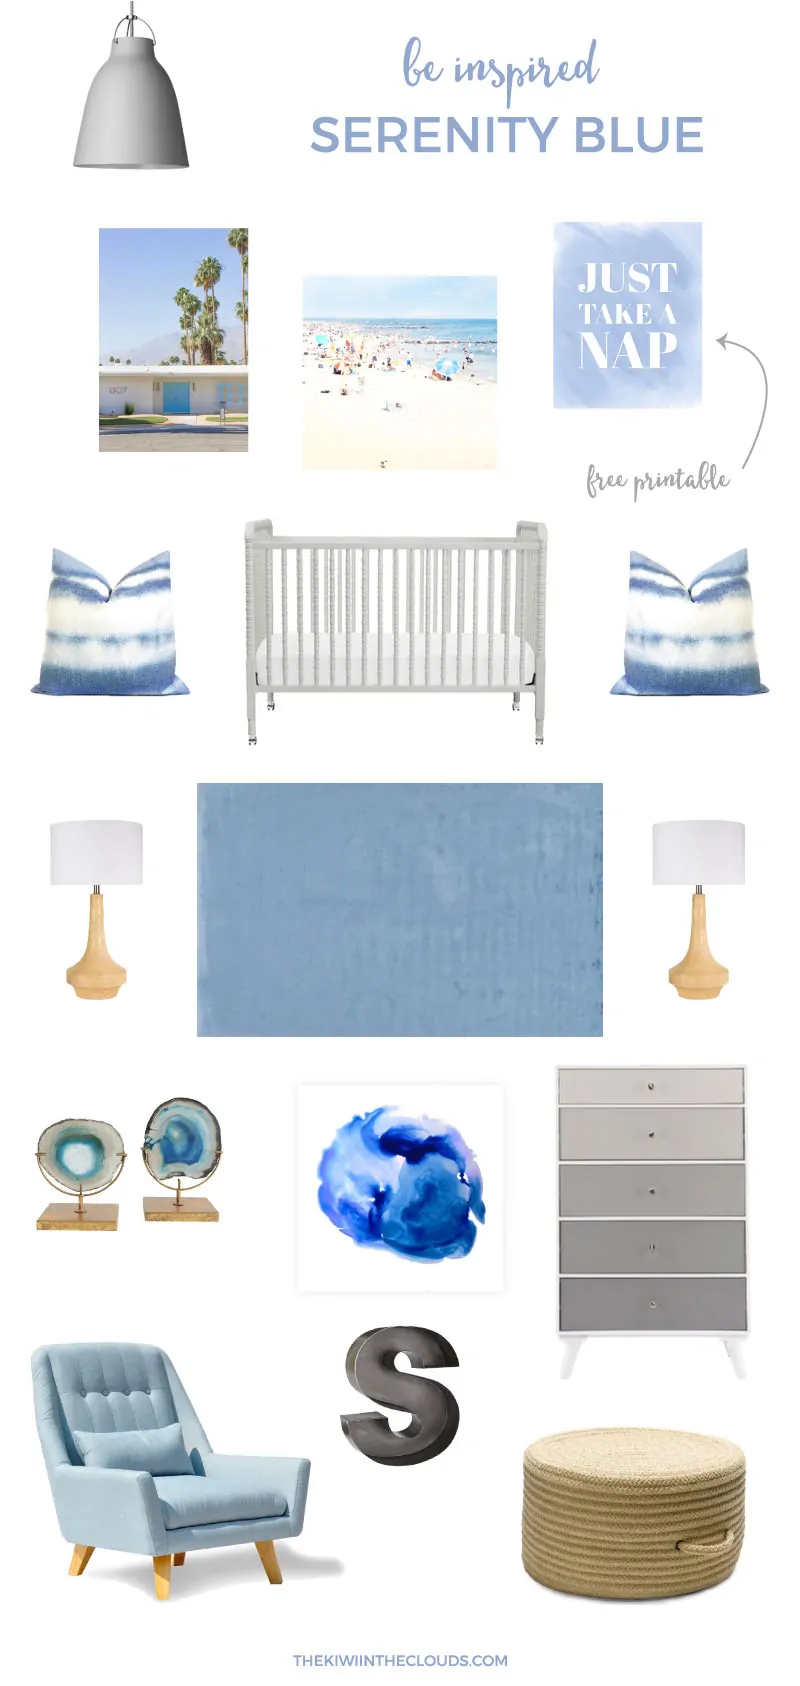 Pantone Nursery | You've seen the Rose Quartz nursery board, now make room for the Serenity blue nursery board. Be right on trend with this cool and calming blue nursery. And download your FREE corresponding printable wall art!